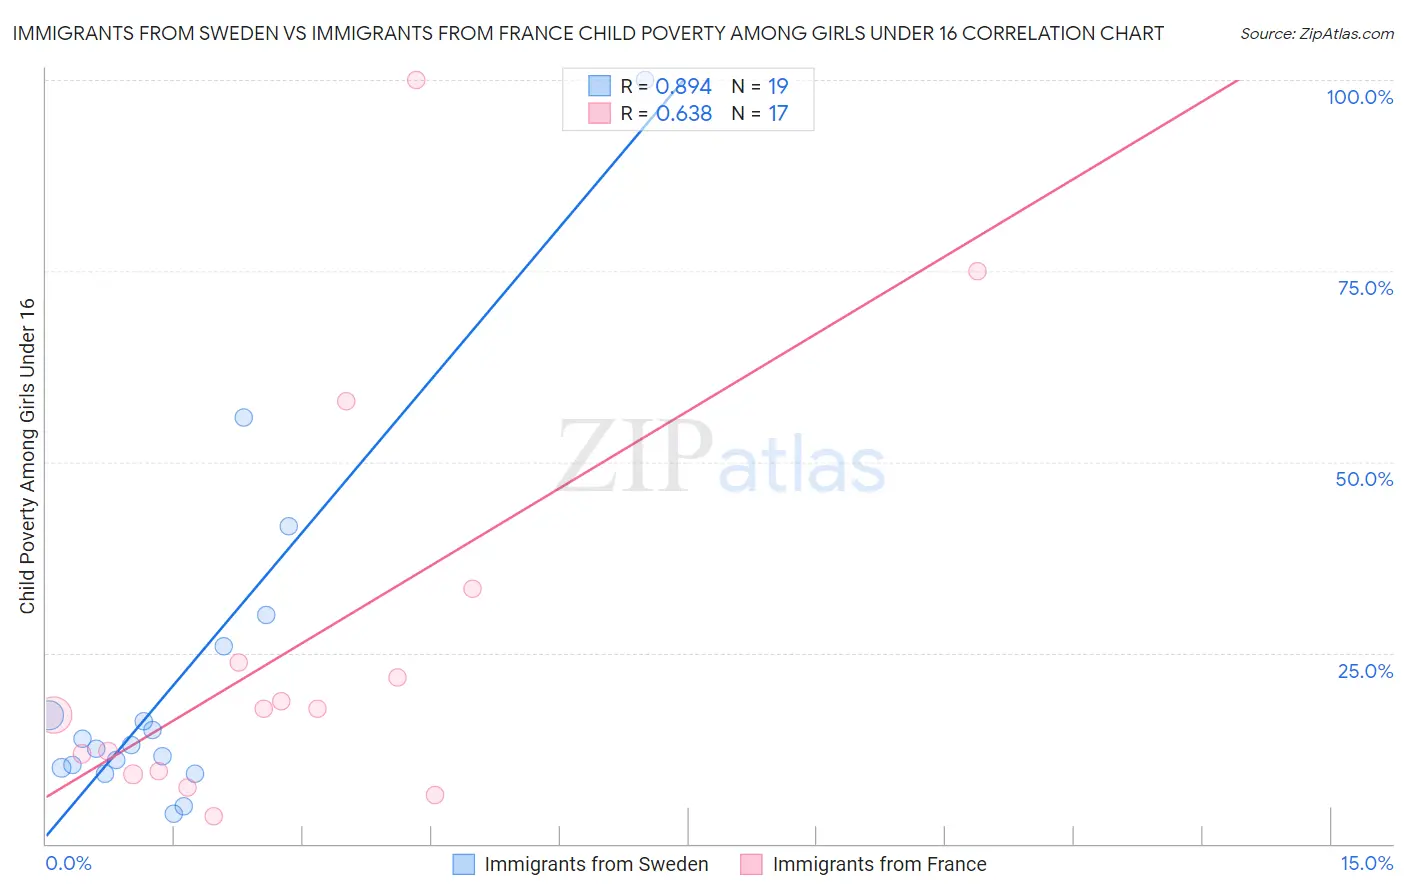 Immigrants from Sweden vs Immigrants from France Child Poverty Among Girls Under 16